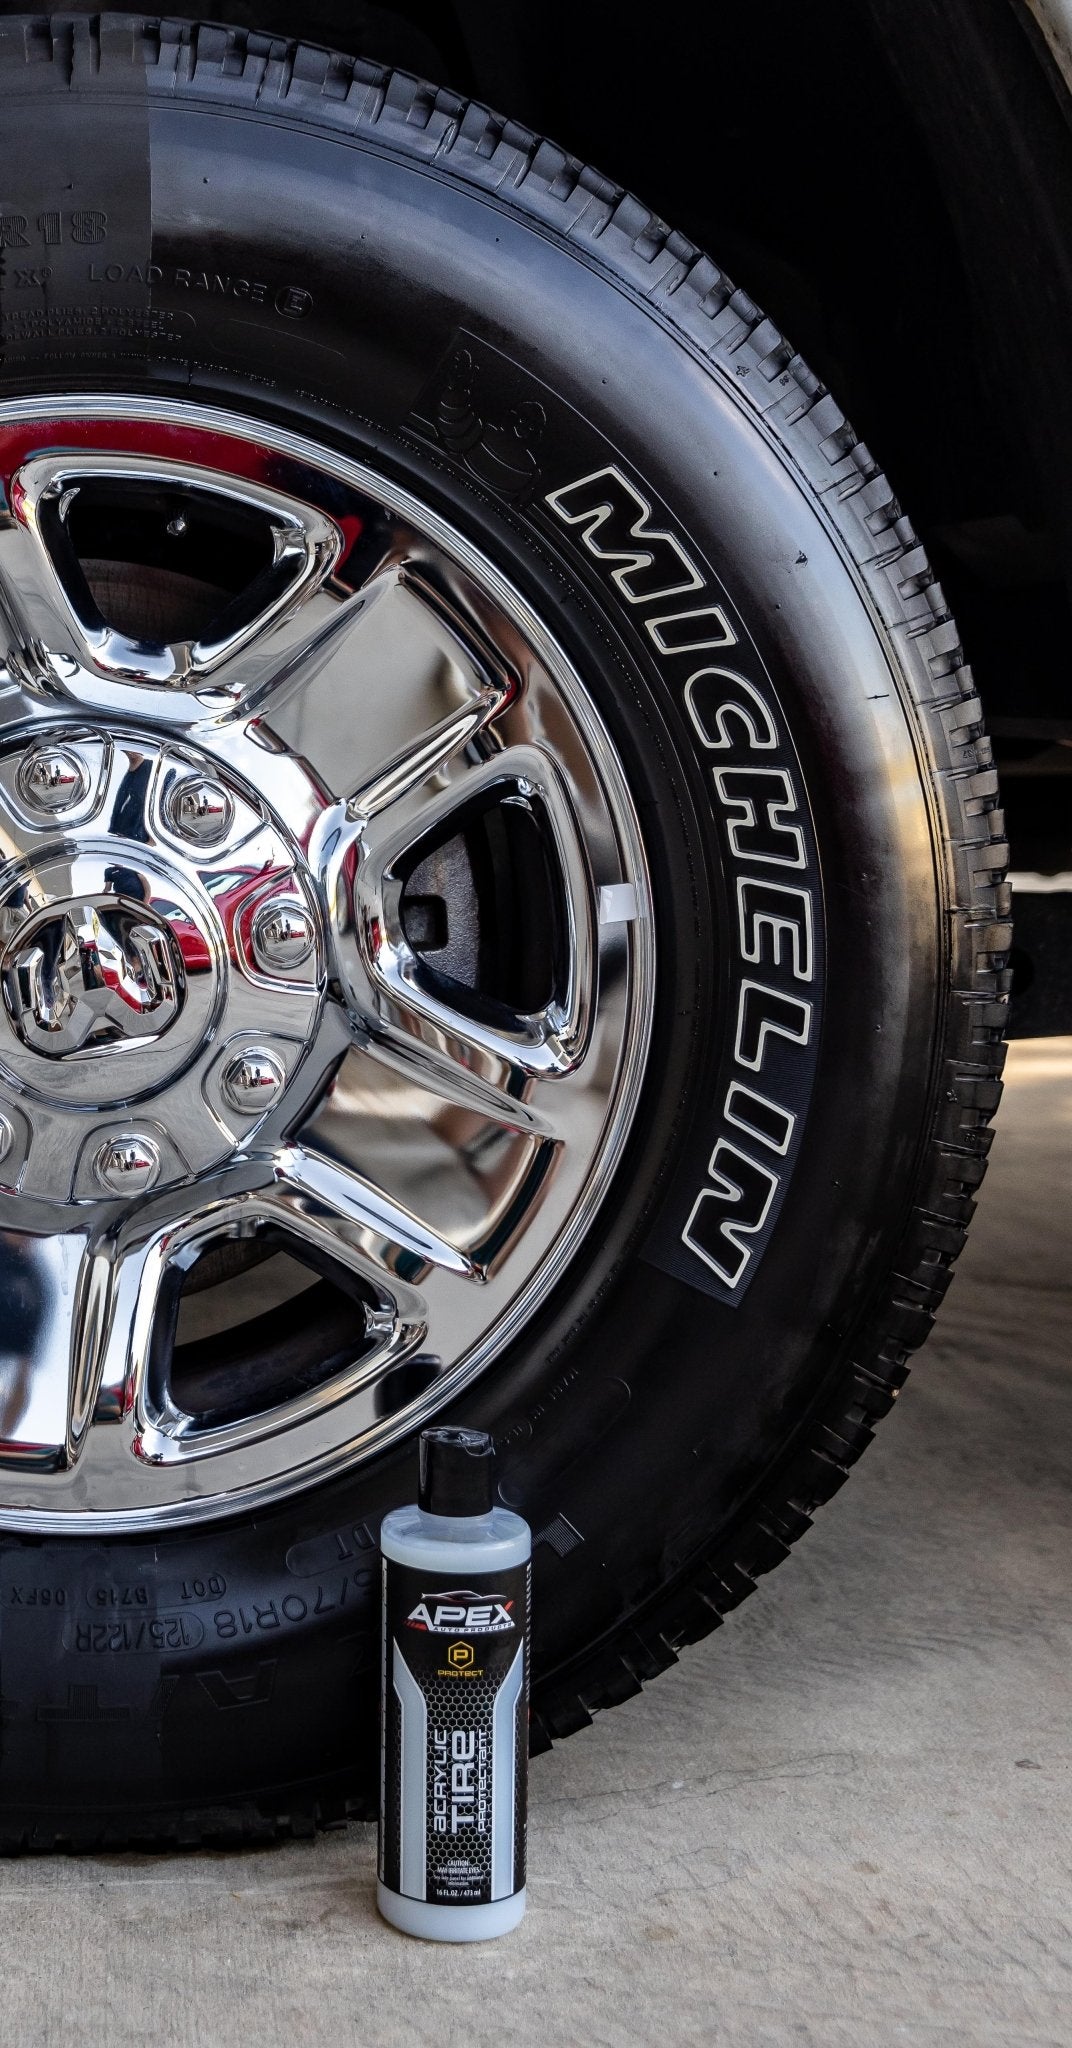 Acrylic Tire Protectant / Shine - APEX Auto Products APEX ACRYLIC TIRE  PROTECTANT is a water-based semi permanent tire shine. Once applied, it  dries in minutes to provide a hard, durable, and